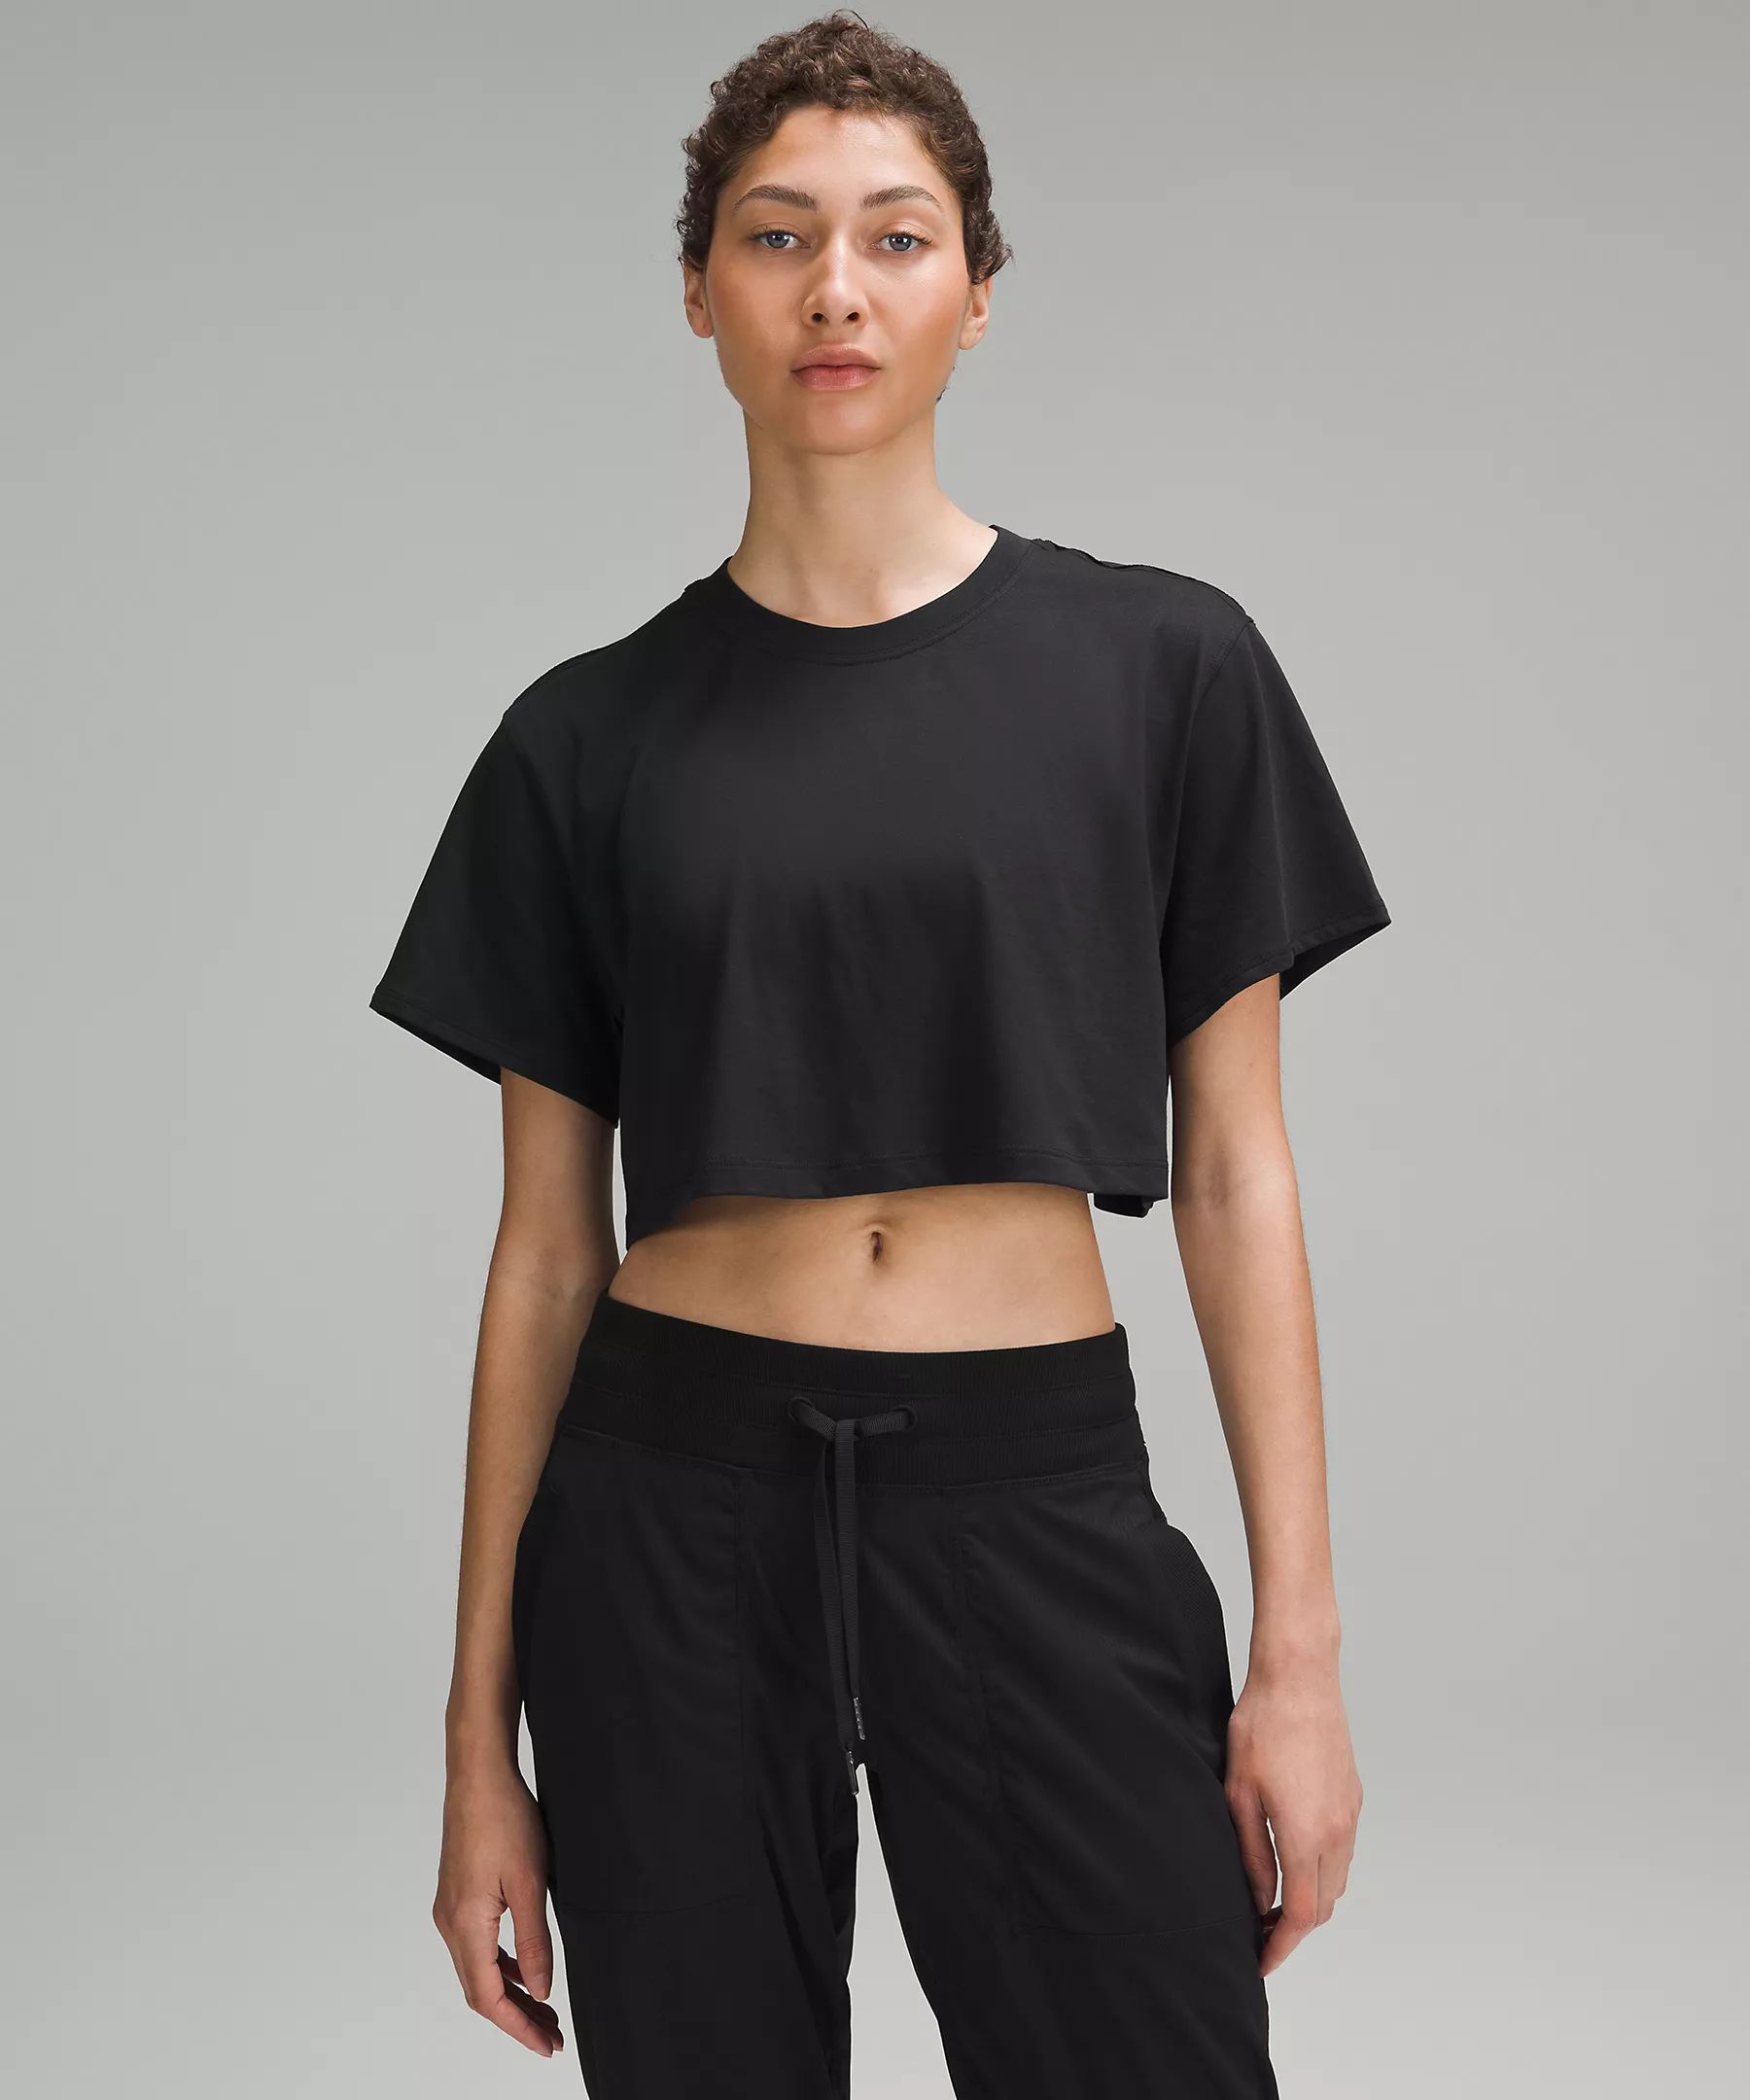 All Yours Cropped T-Shirt *Online Only | Women's Short Sleeve Shirts & Tee's | lululemon | Lululemon (US)